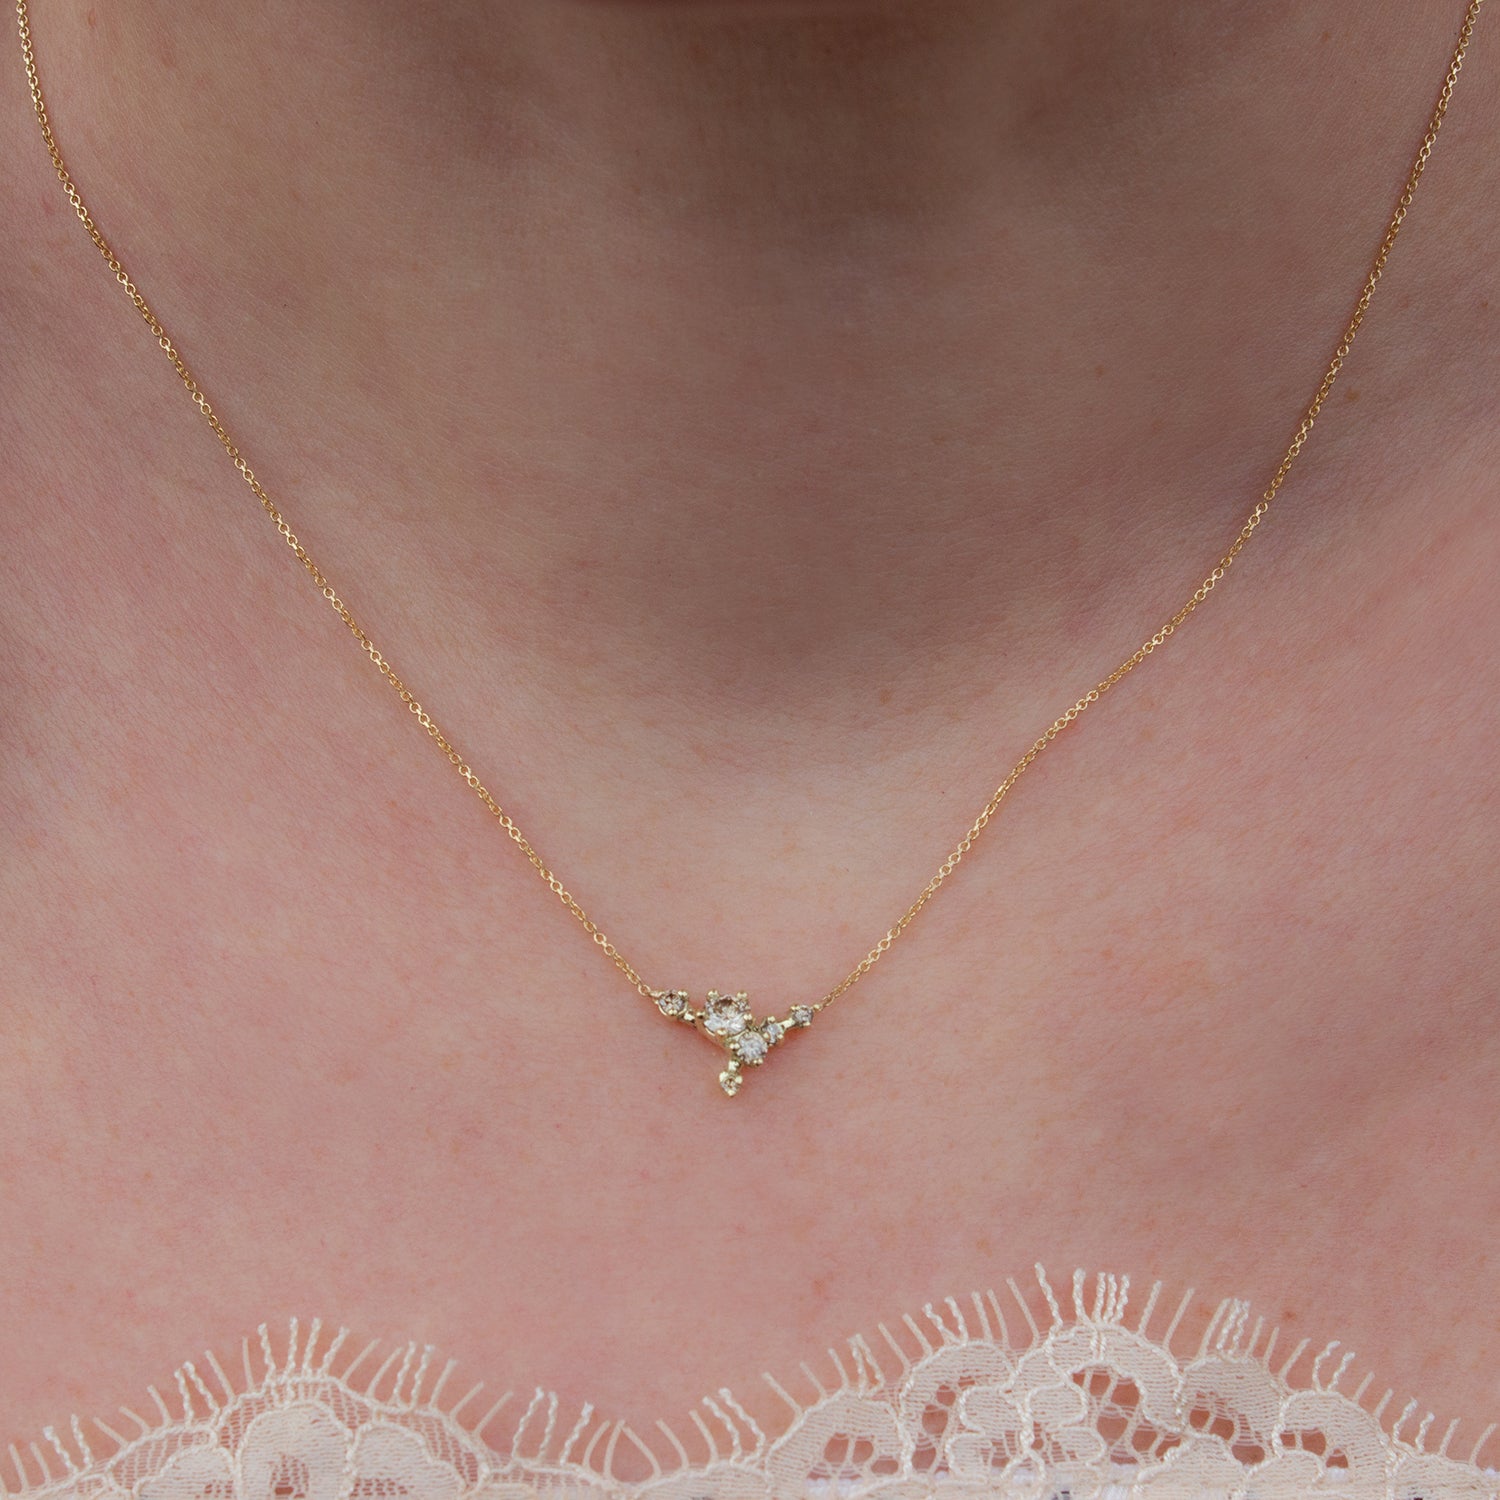 Delicate cluster necklace featuring champagne diamonds and inspired by first blossoms.